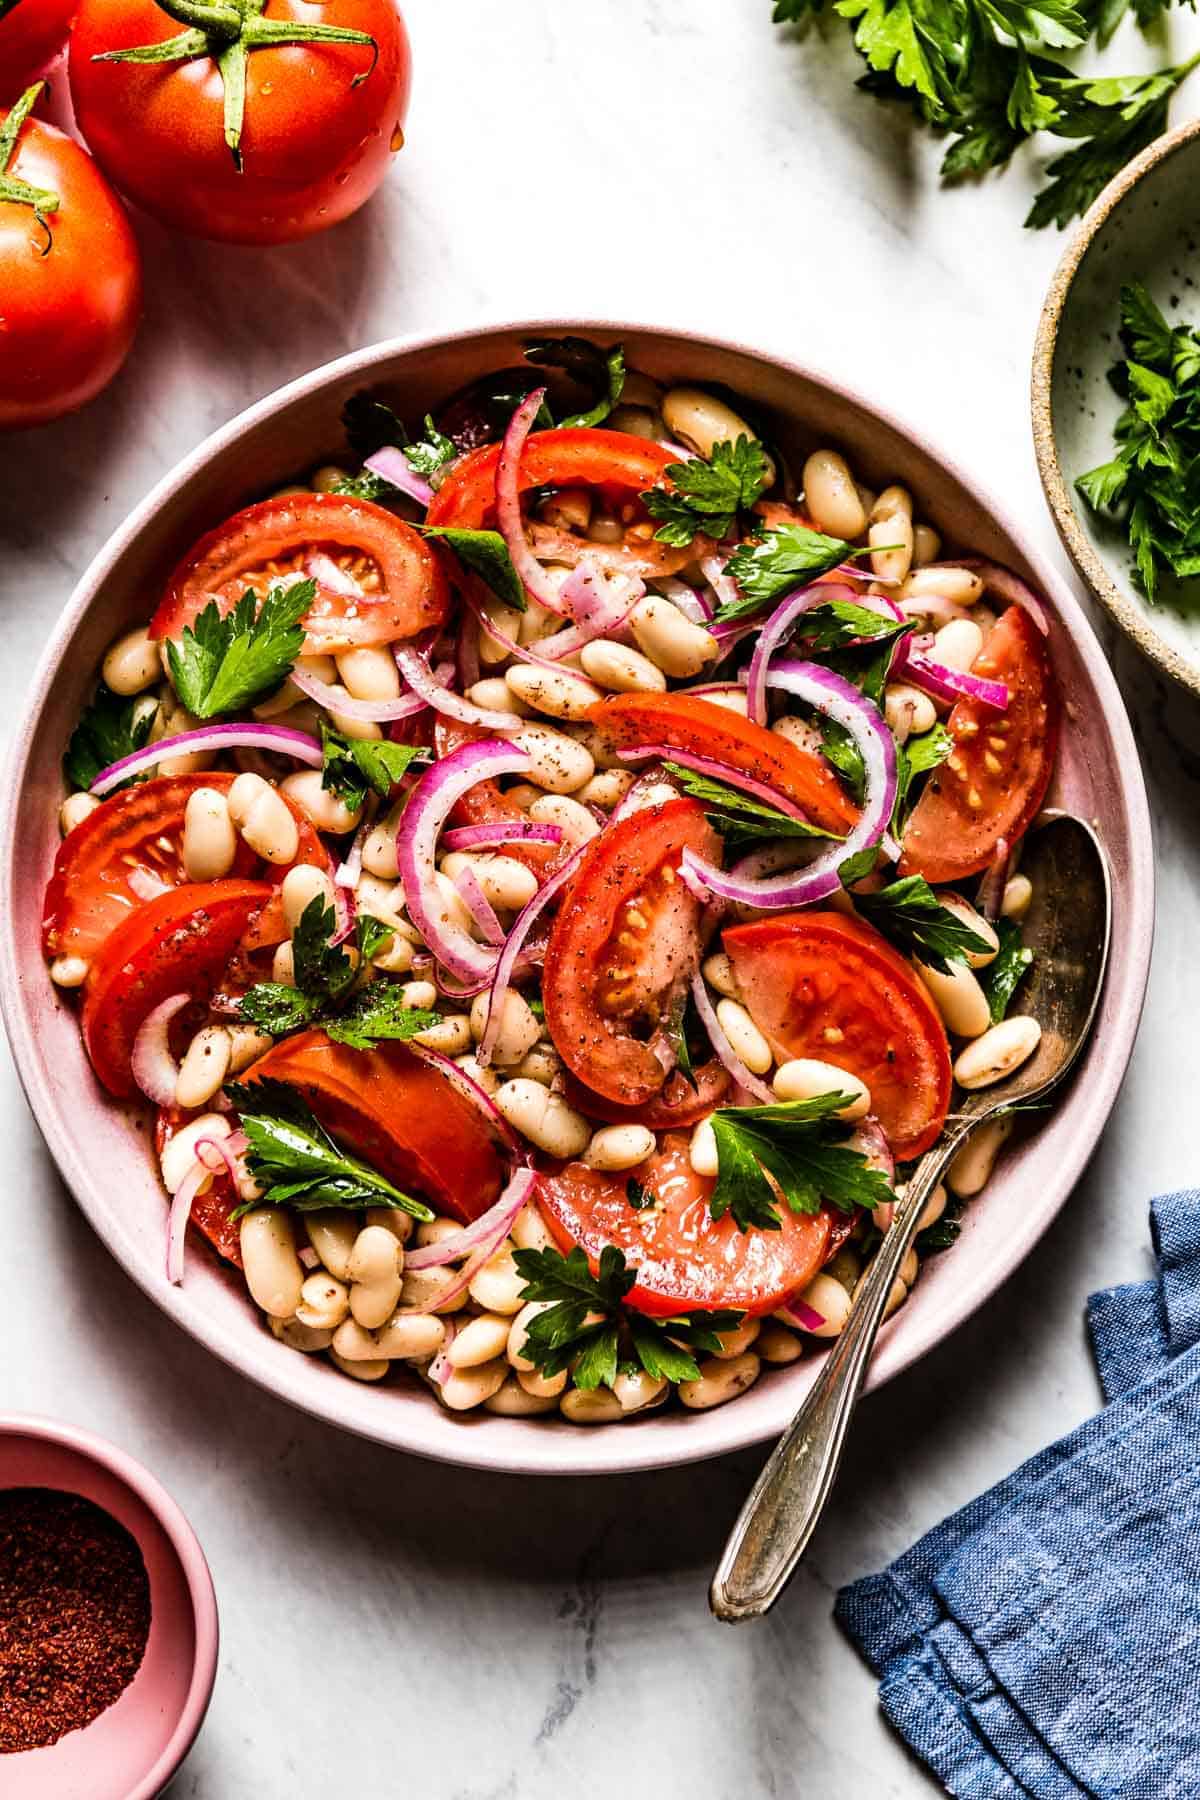 Piyaz - Turkish White Bean Salad in a bowl with a spoon on the side from top view.